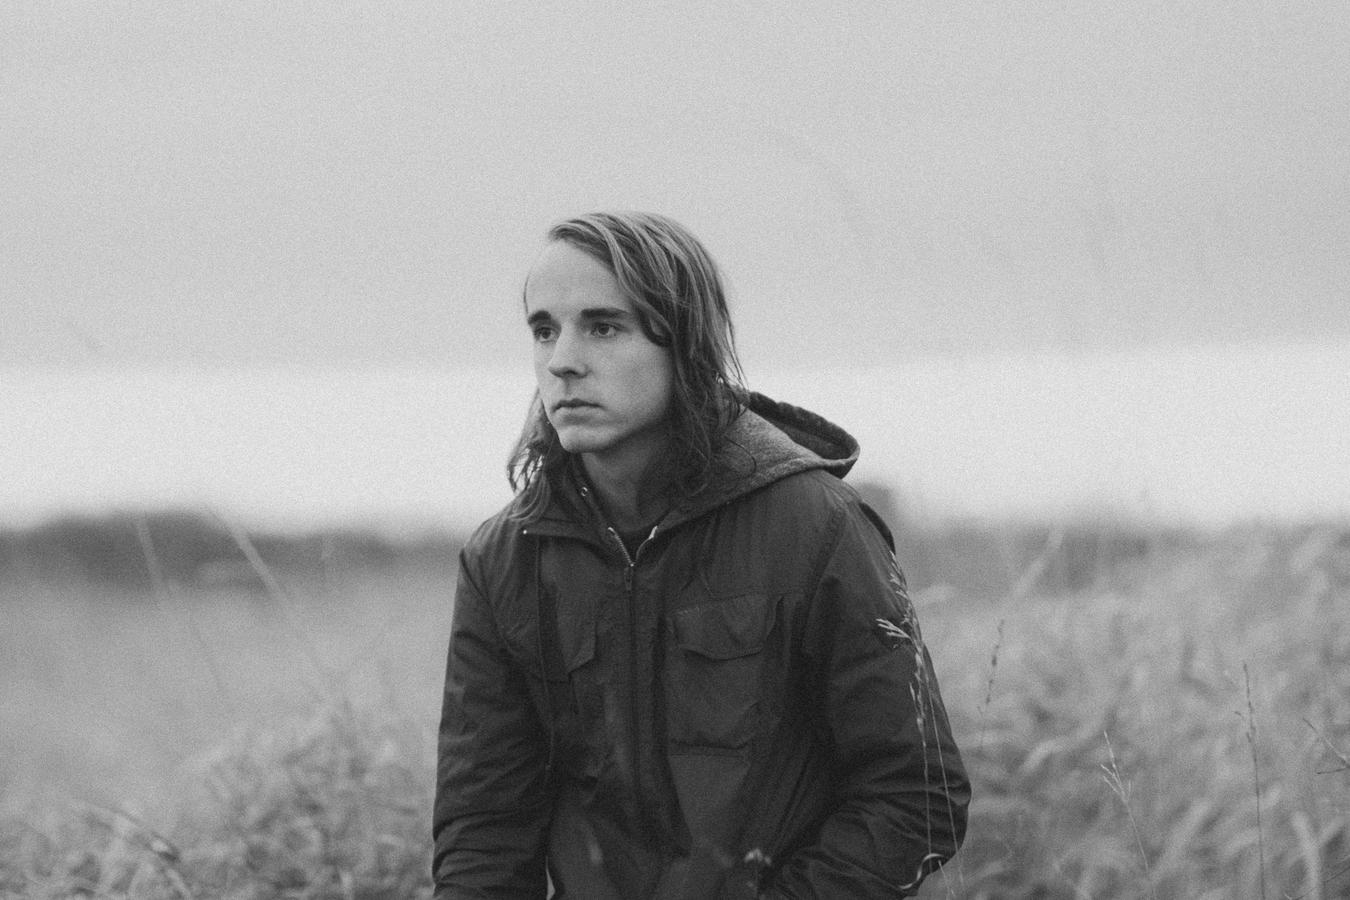 Interview with Andy Shauf by Brit Bachmann.